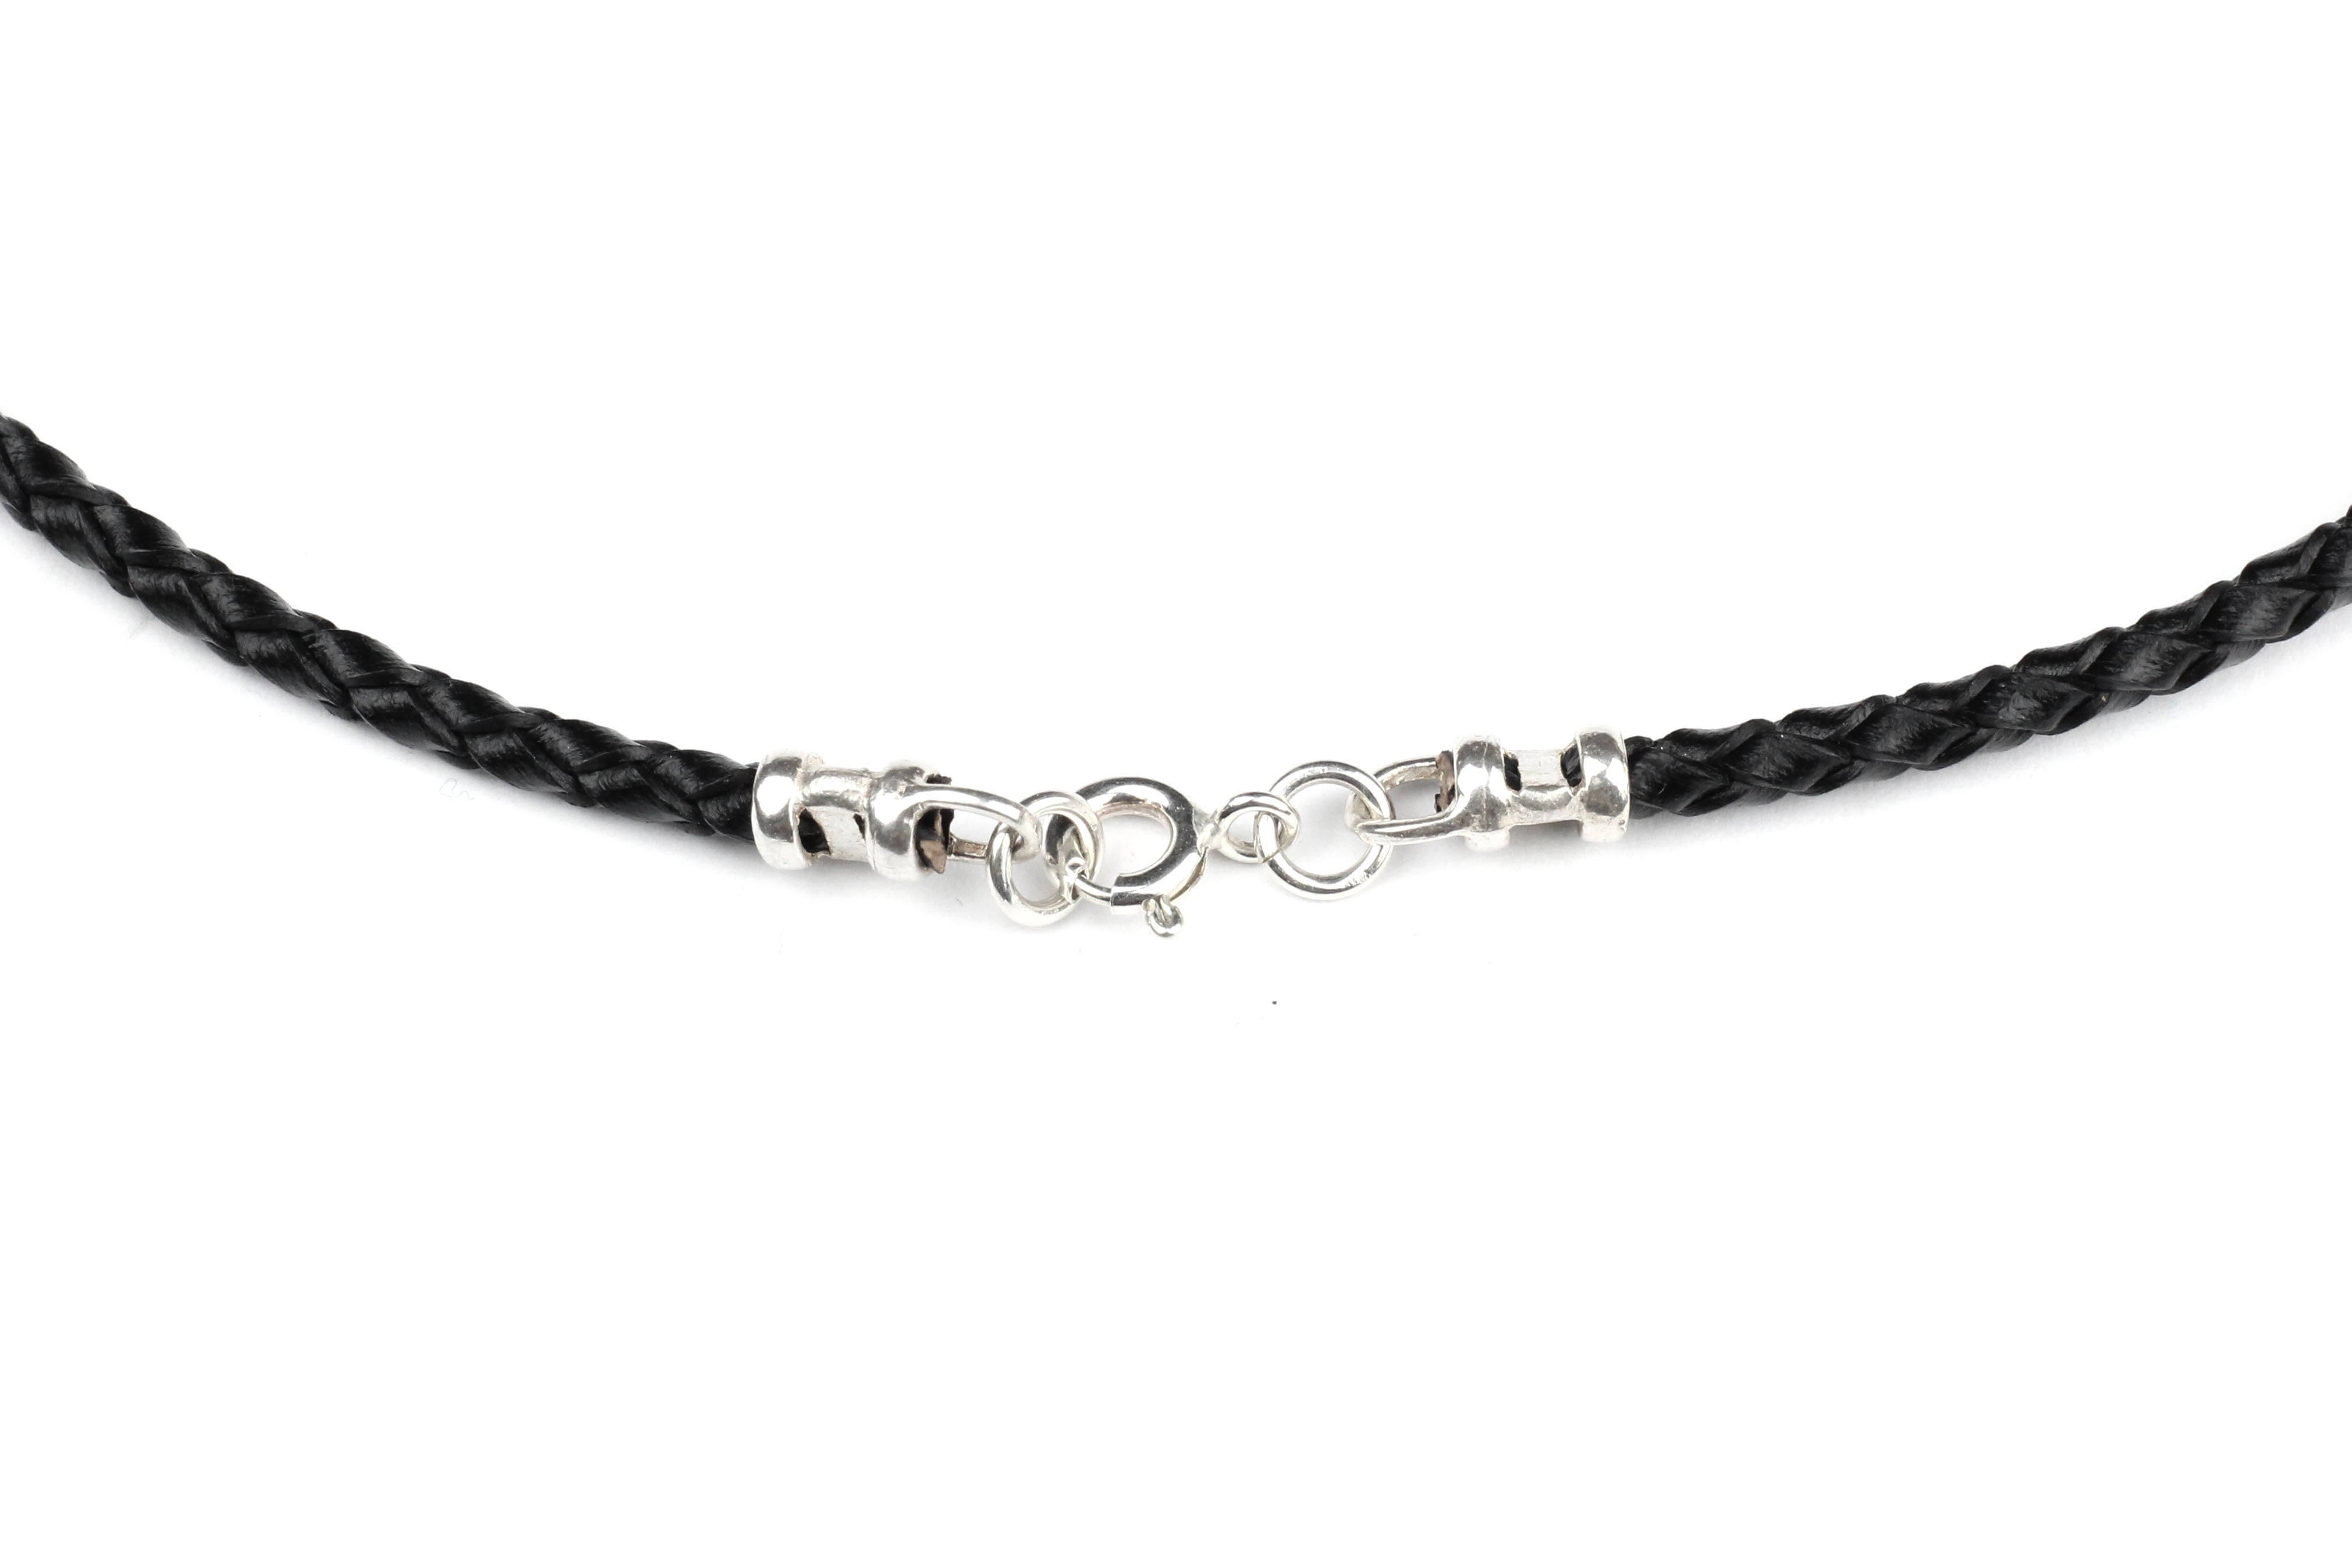 20 Black Leather Cord Necklace - 10 Pack